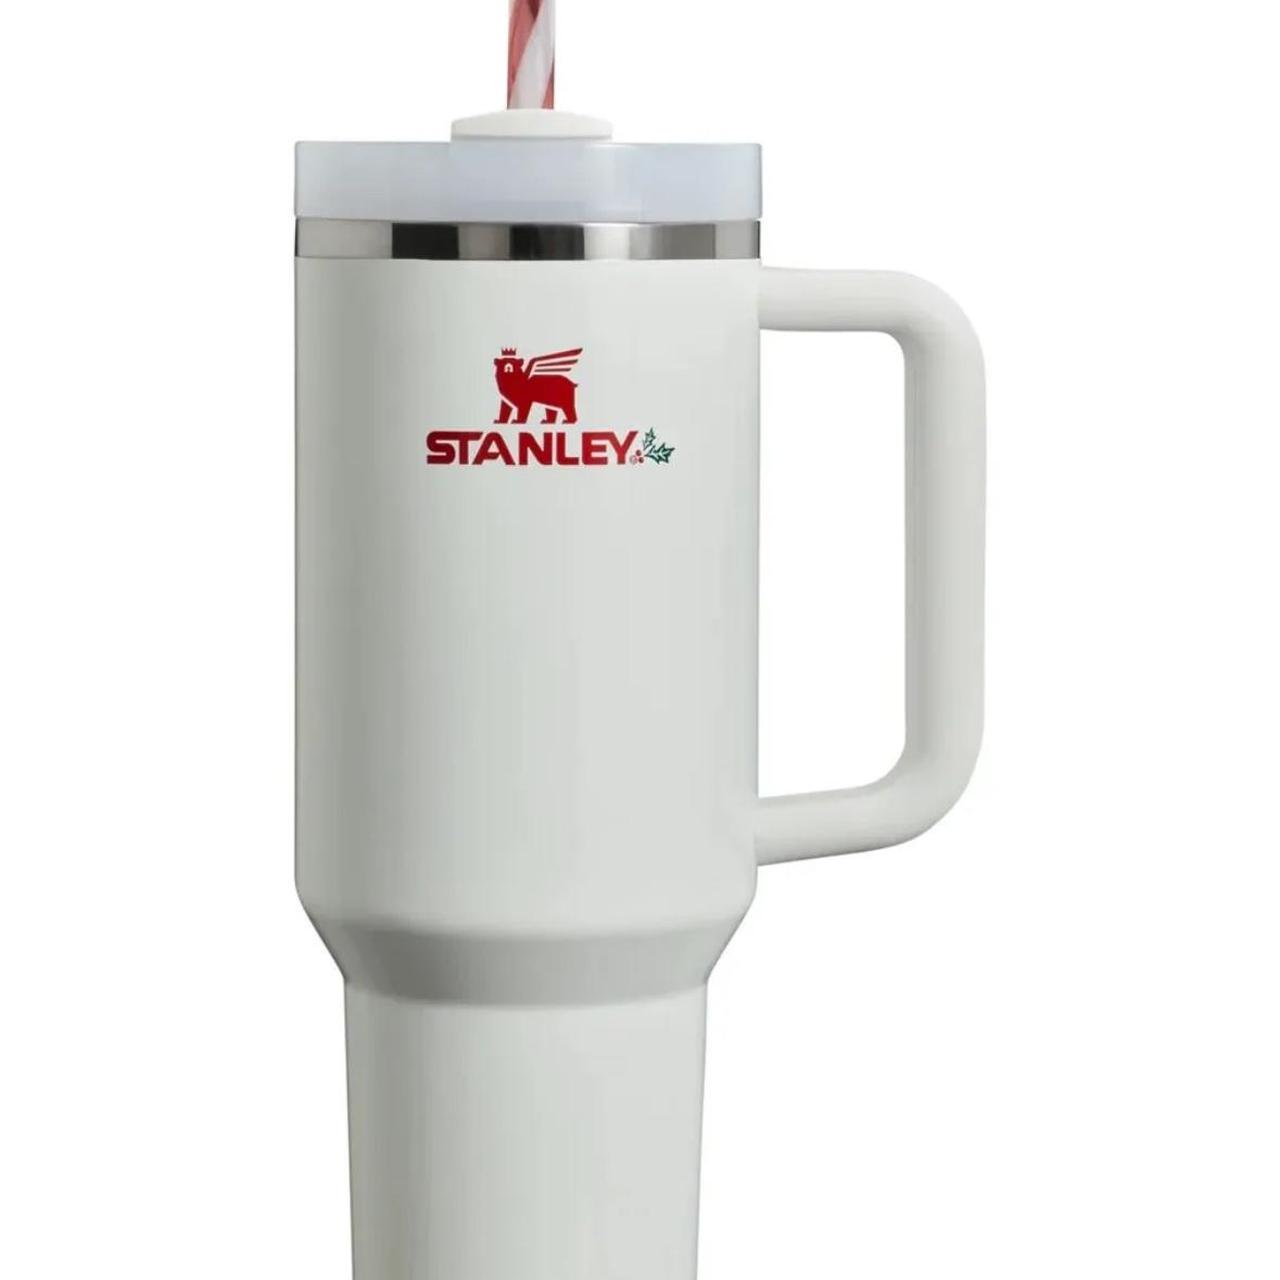 NEW Limited Edition Stanley Quencher H2.0 Tumbler 40 - Depop